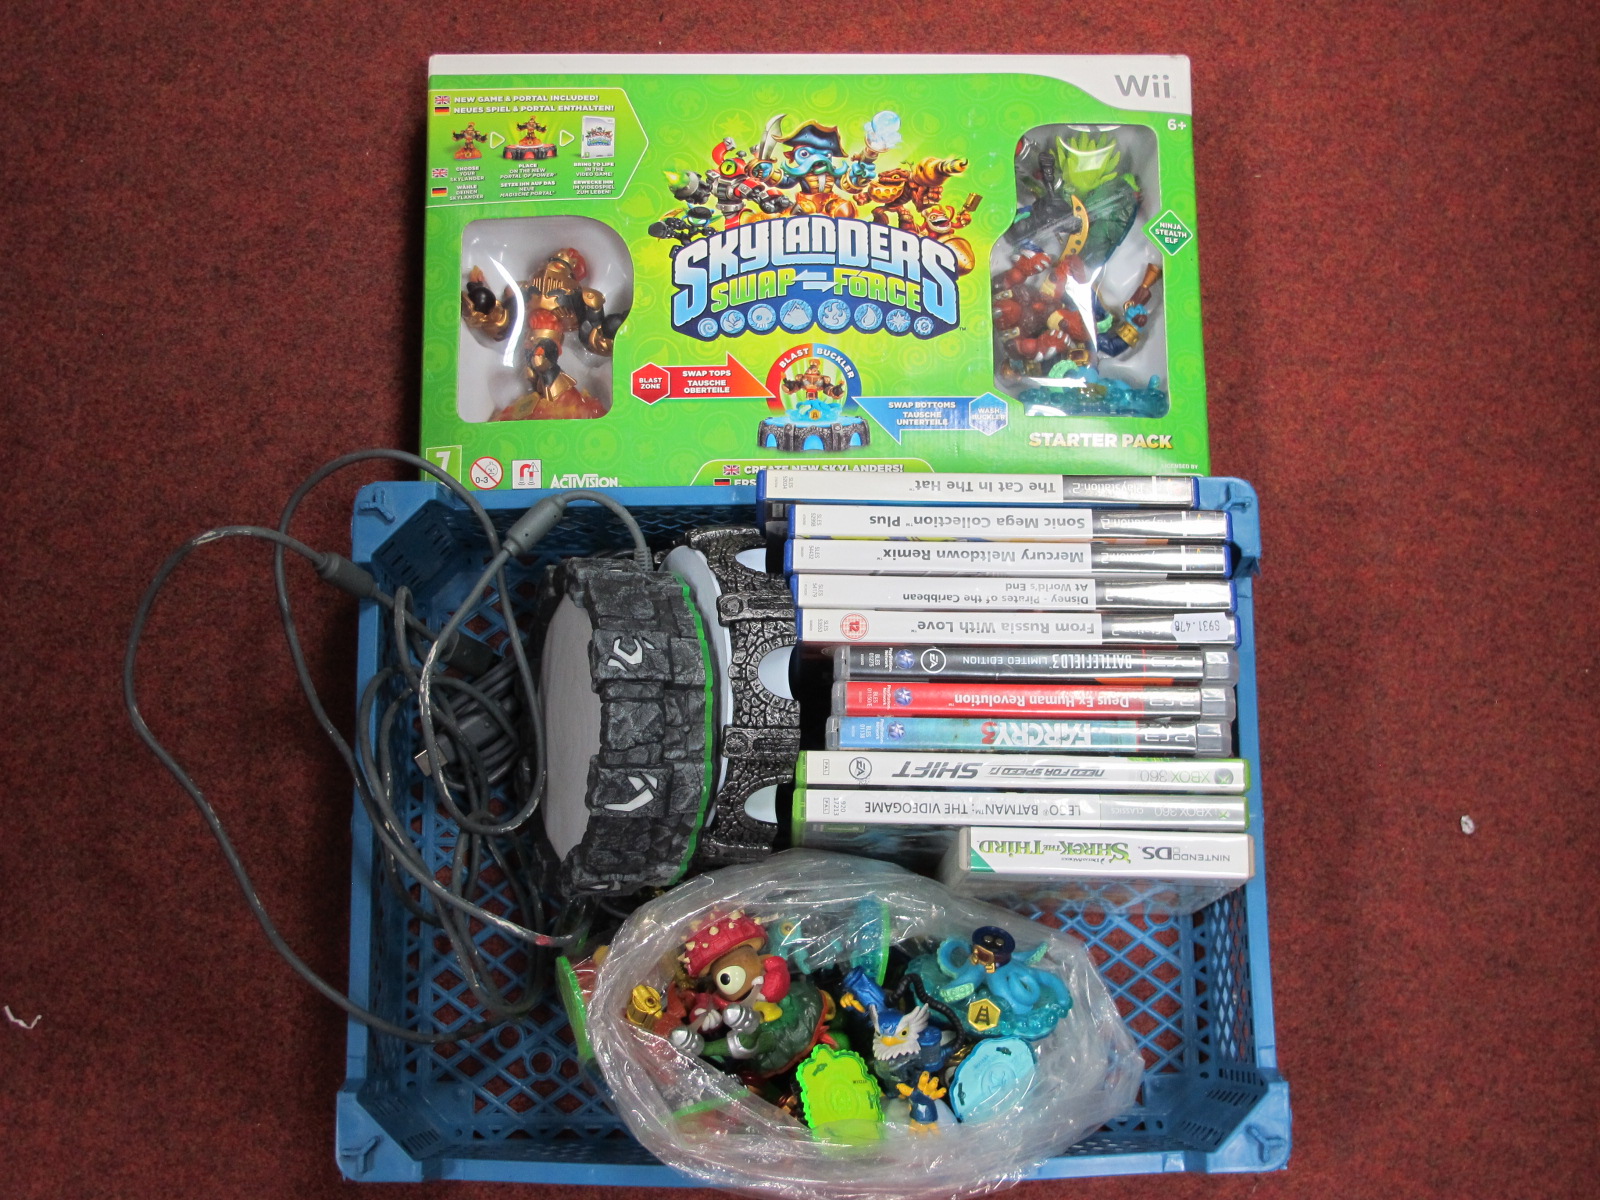 A Quantity of PS2 and PS3 Games, Wii Skylanders, among others.